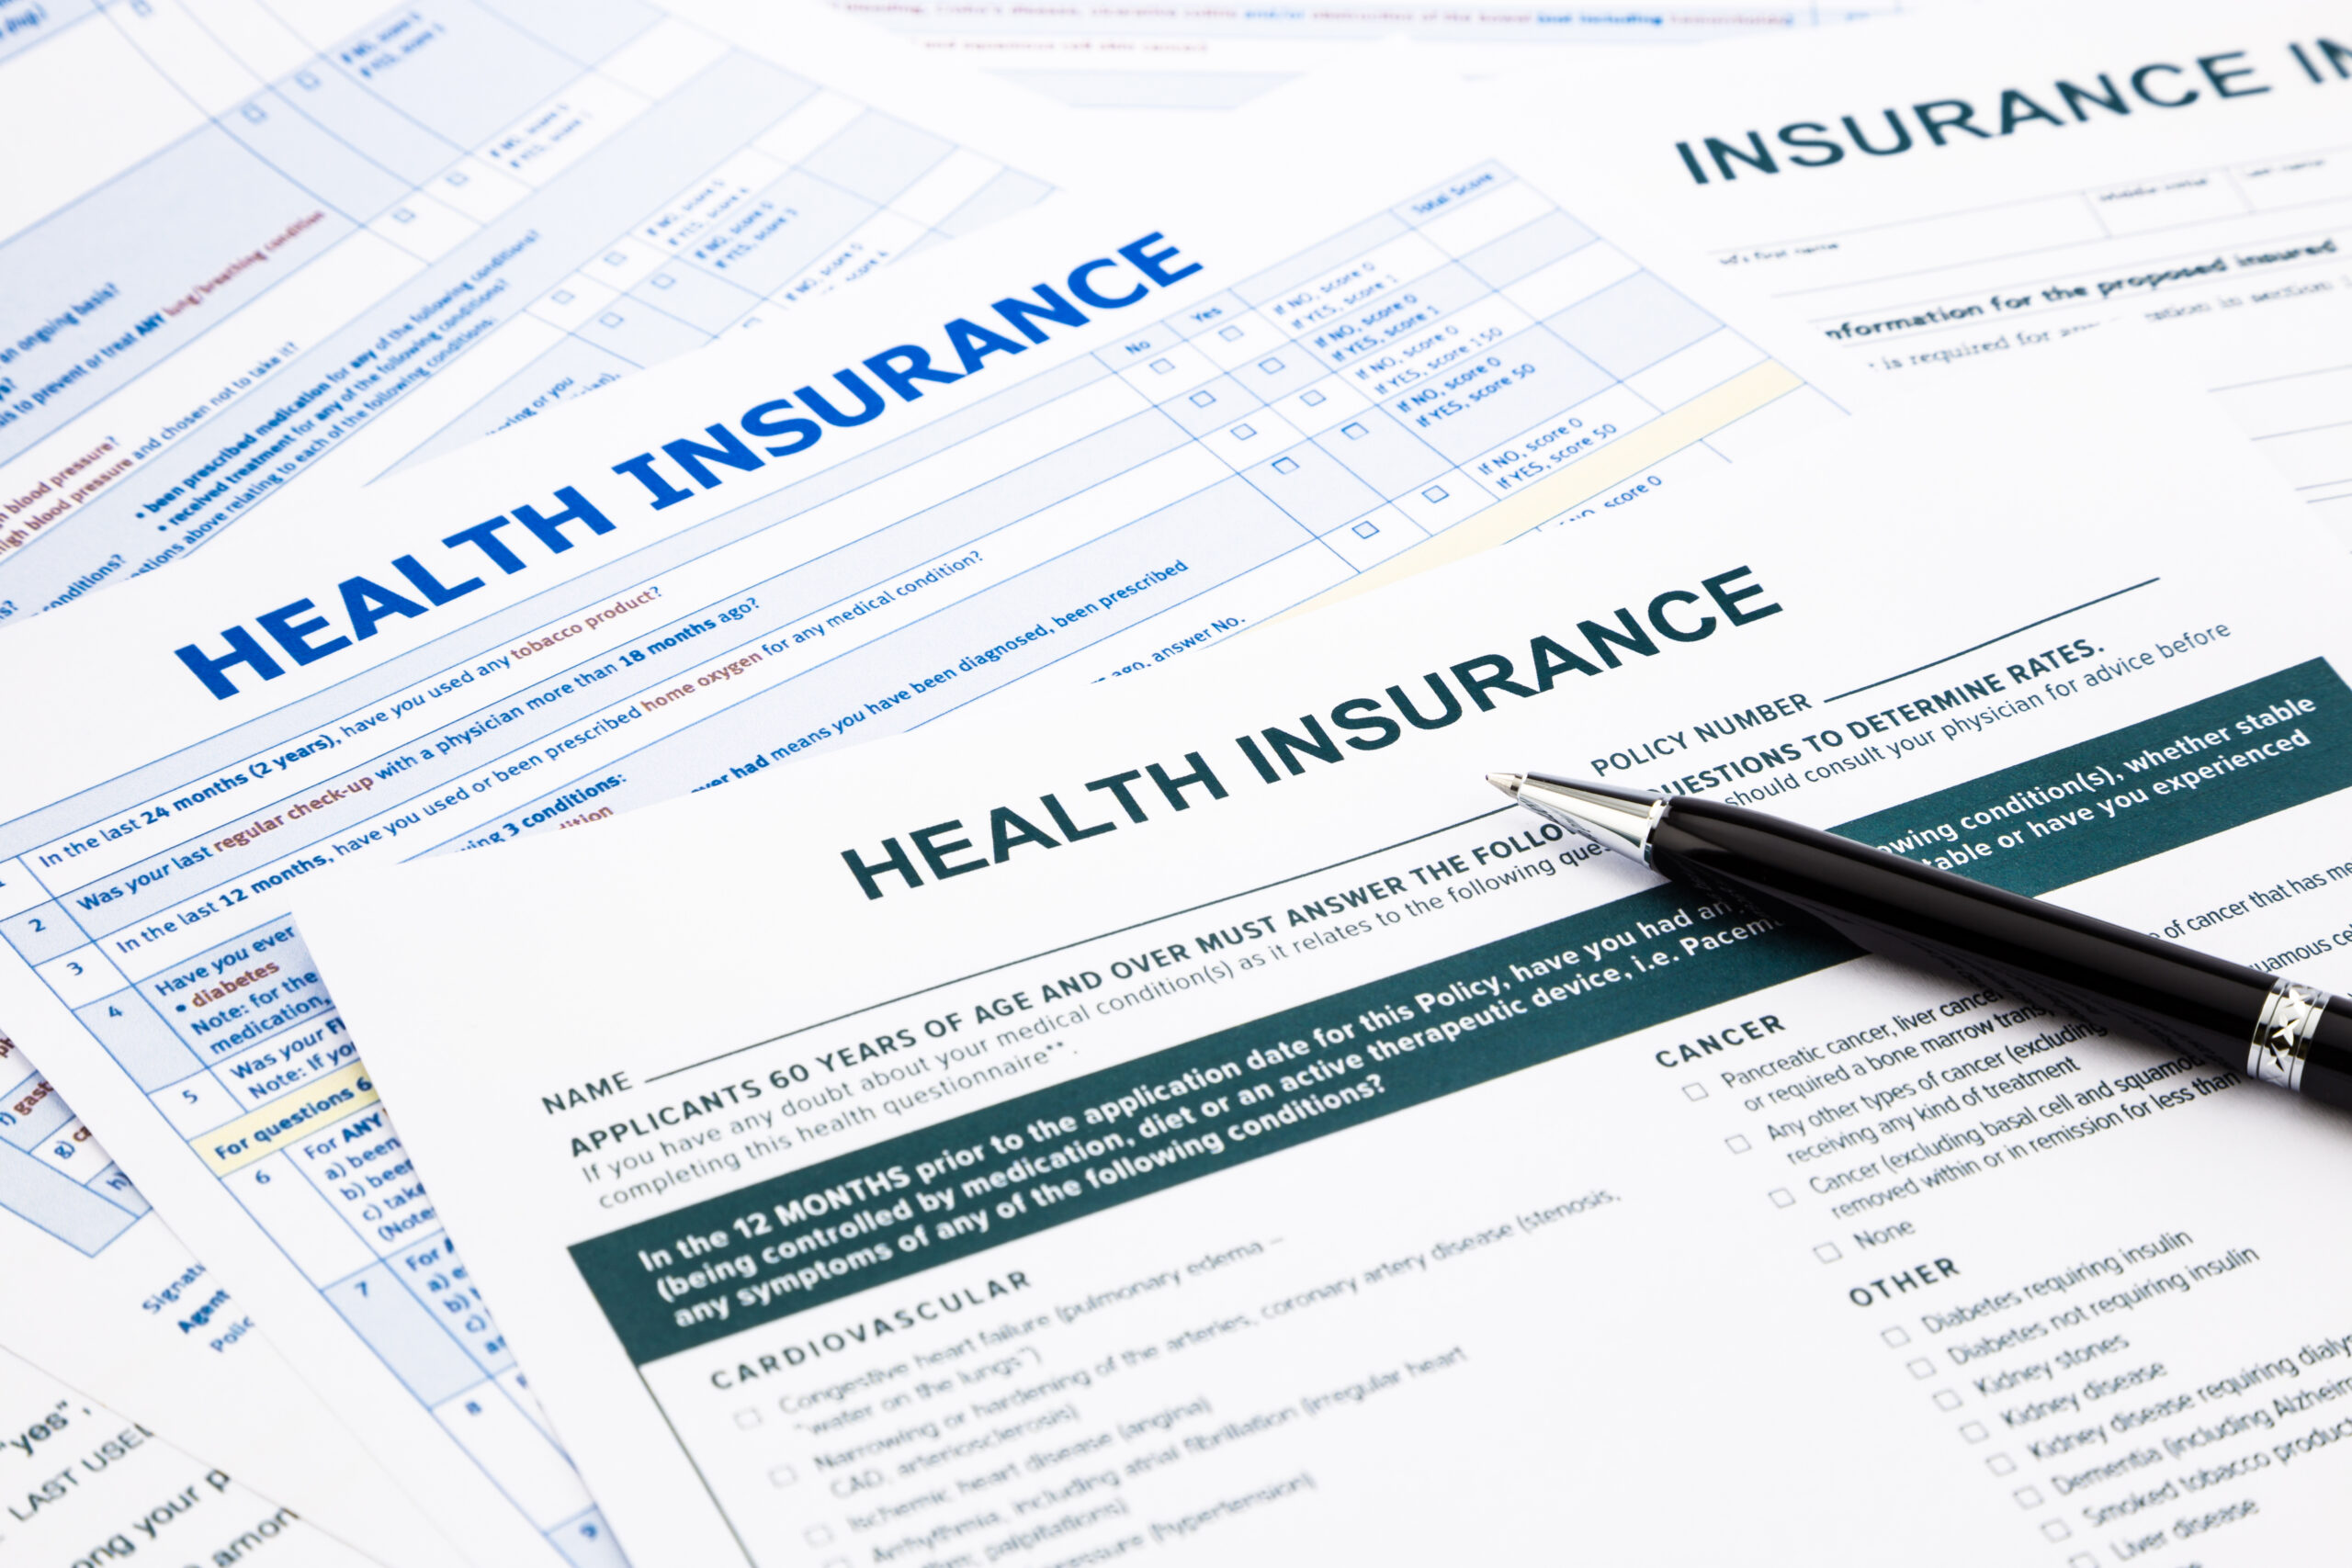  Health Insurance Schemes: Find the Right One for Your Family by Doing This